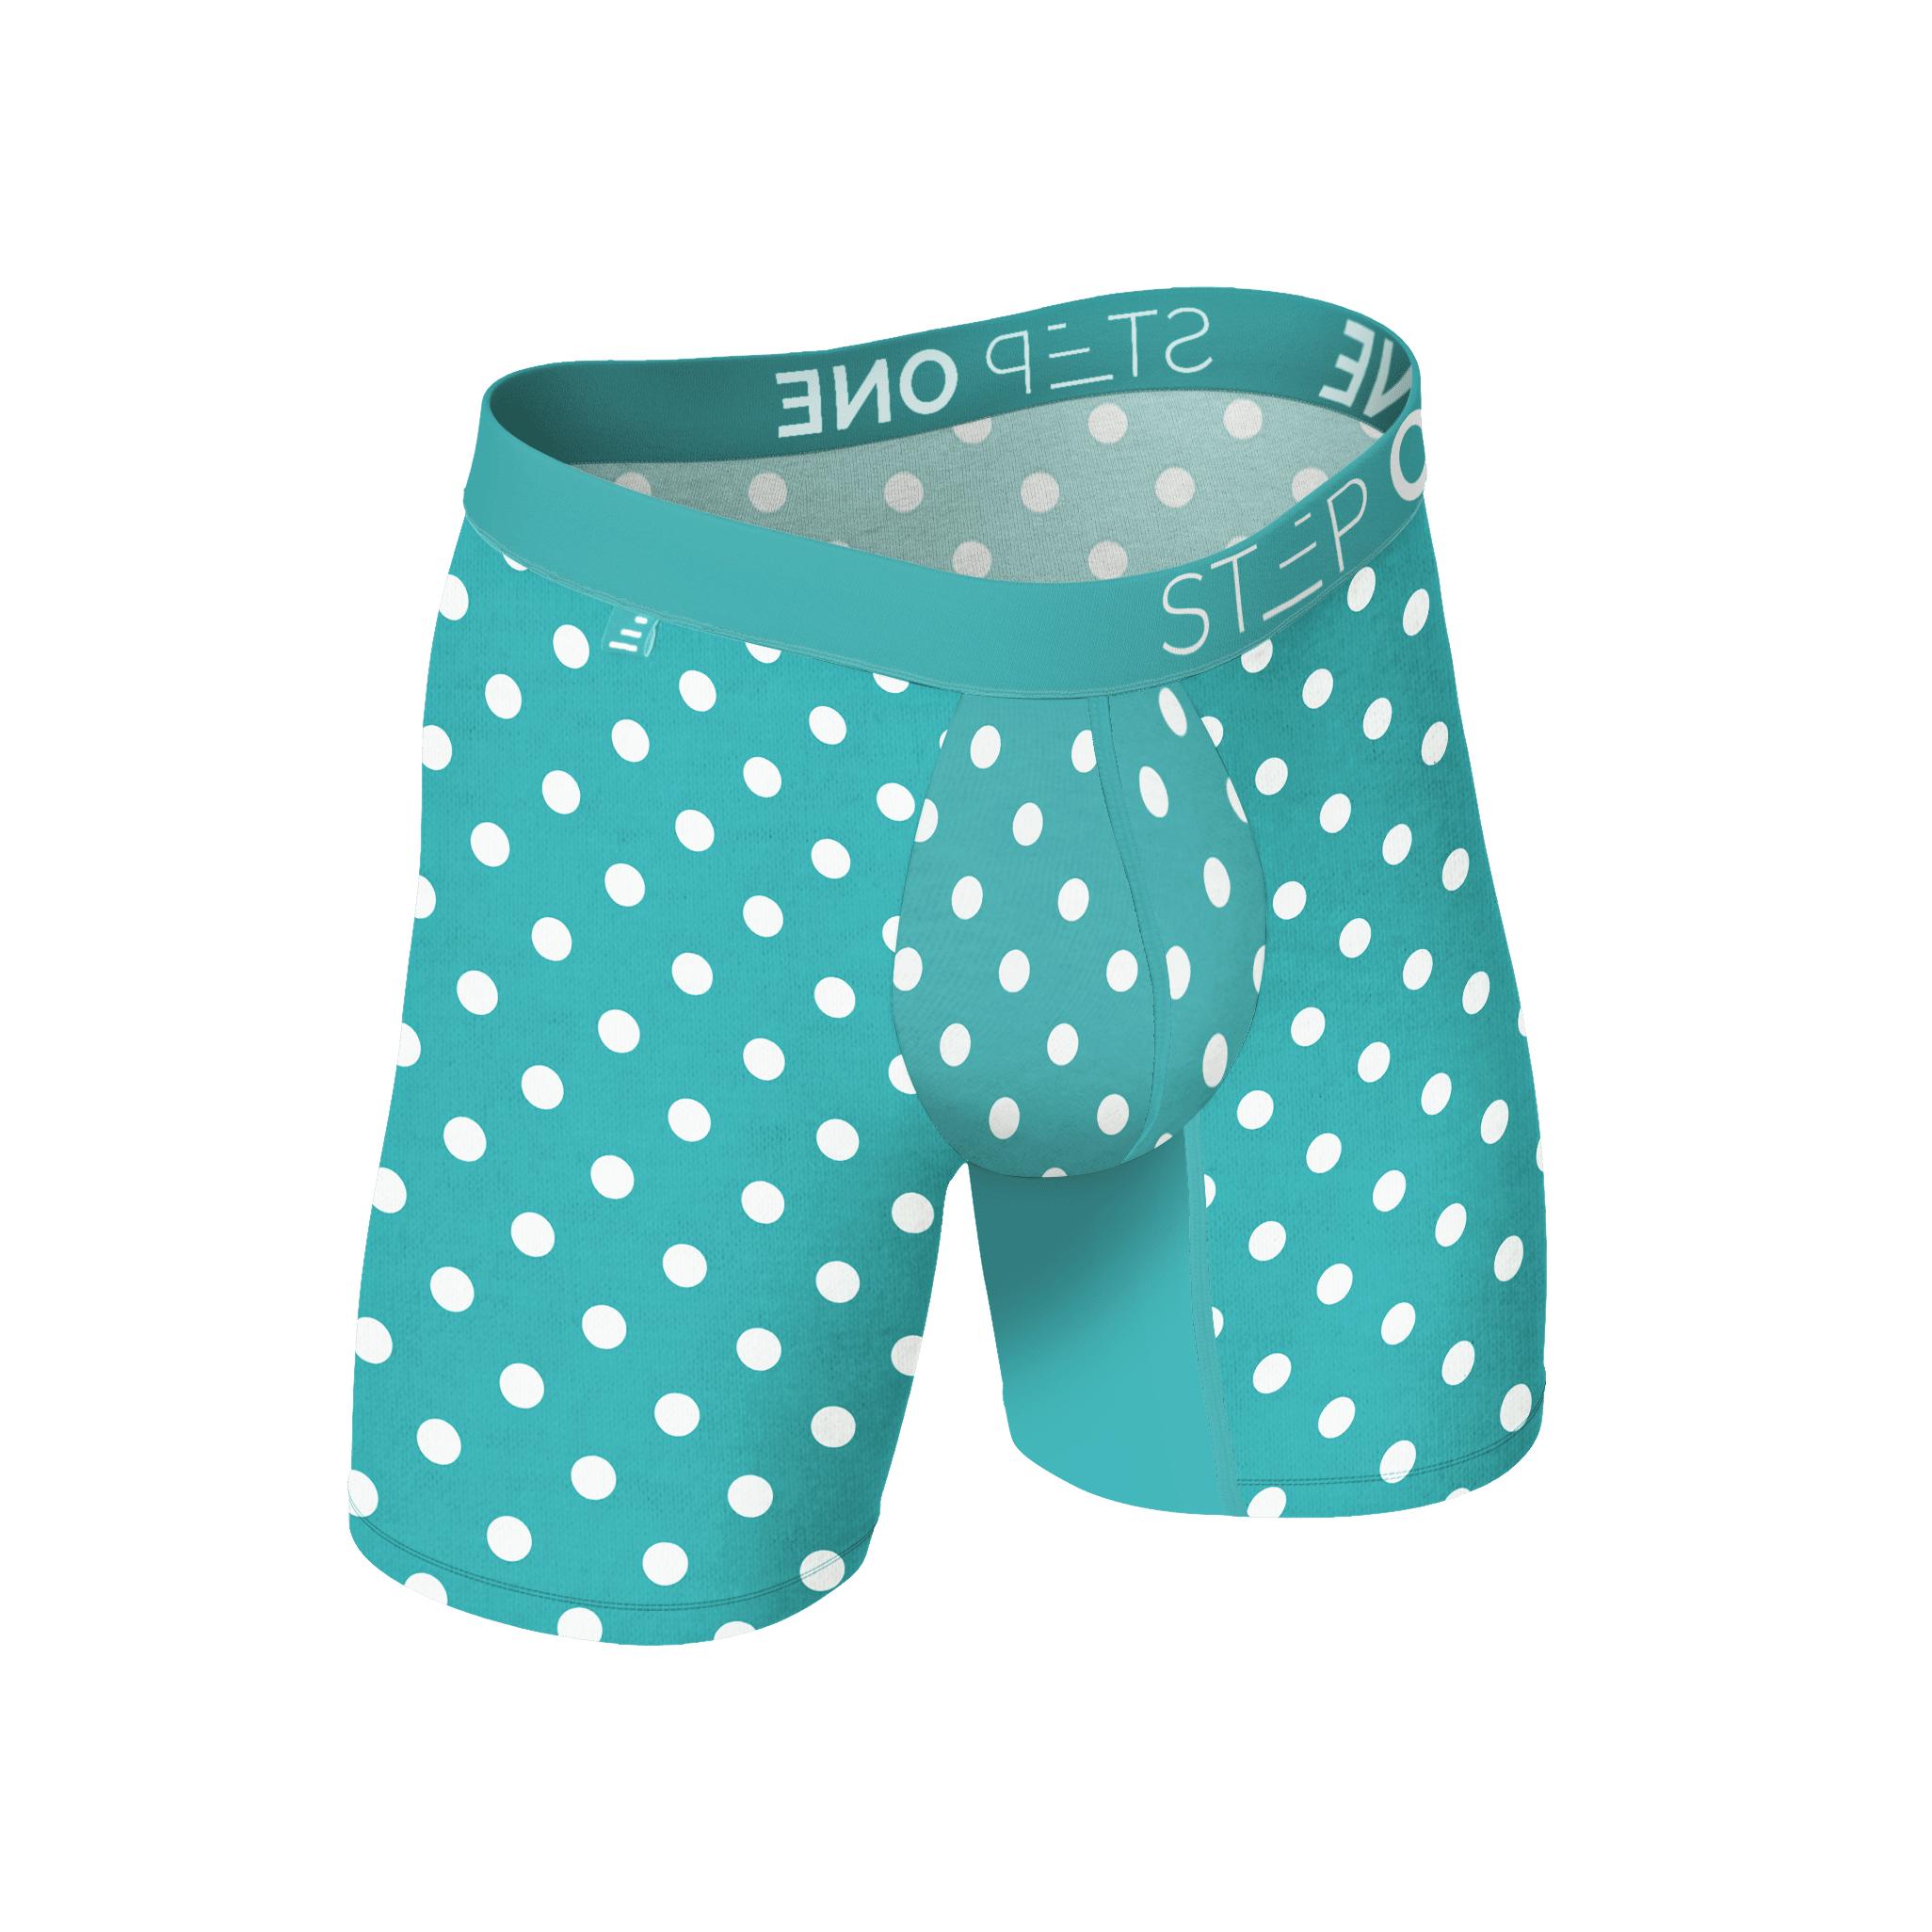 Buy Mens Bamboo Underwear at Step One